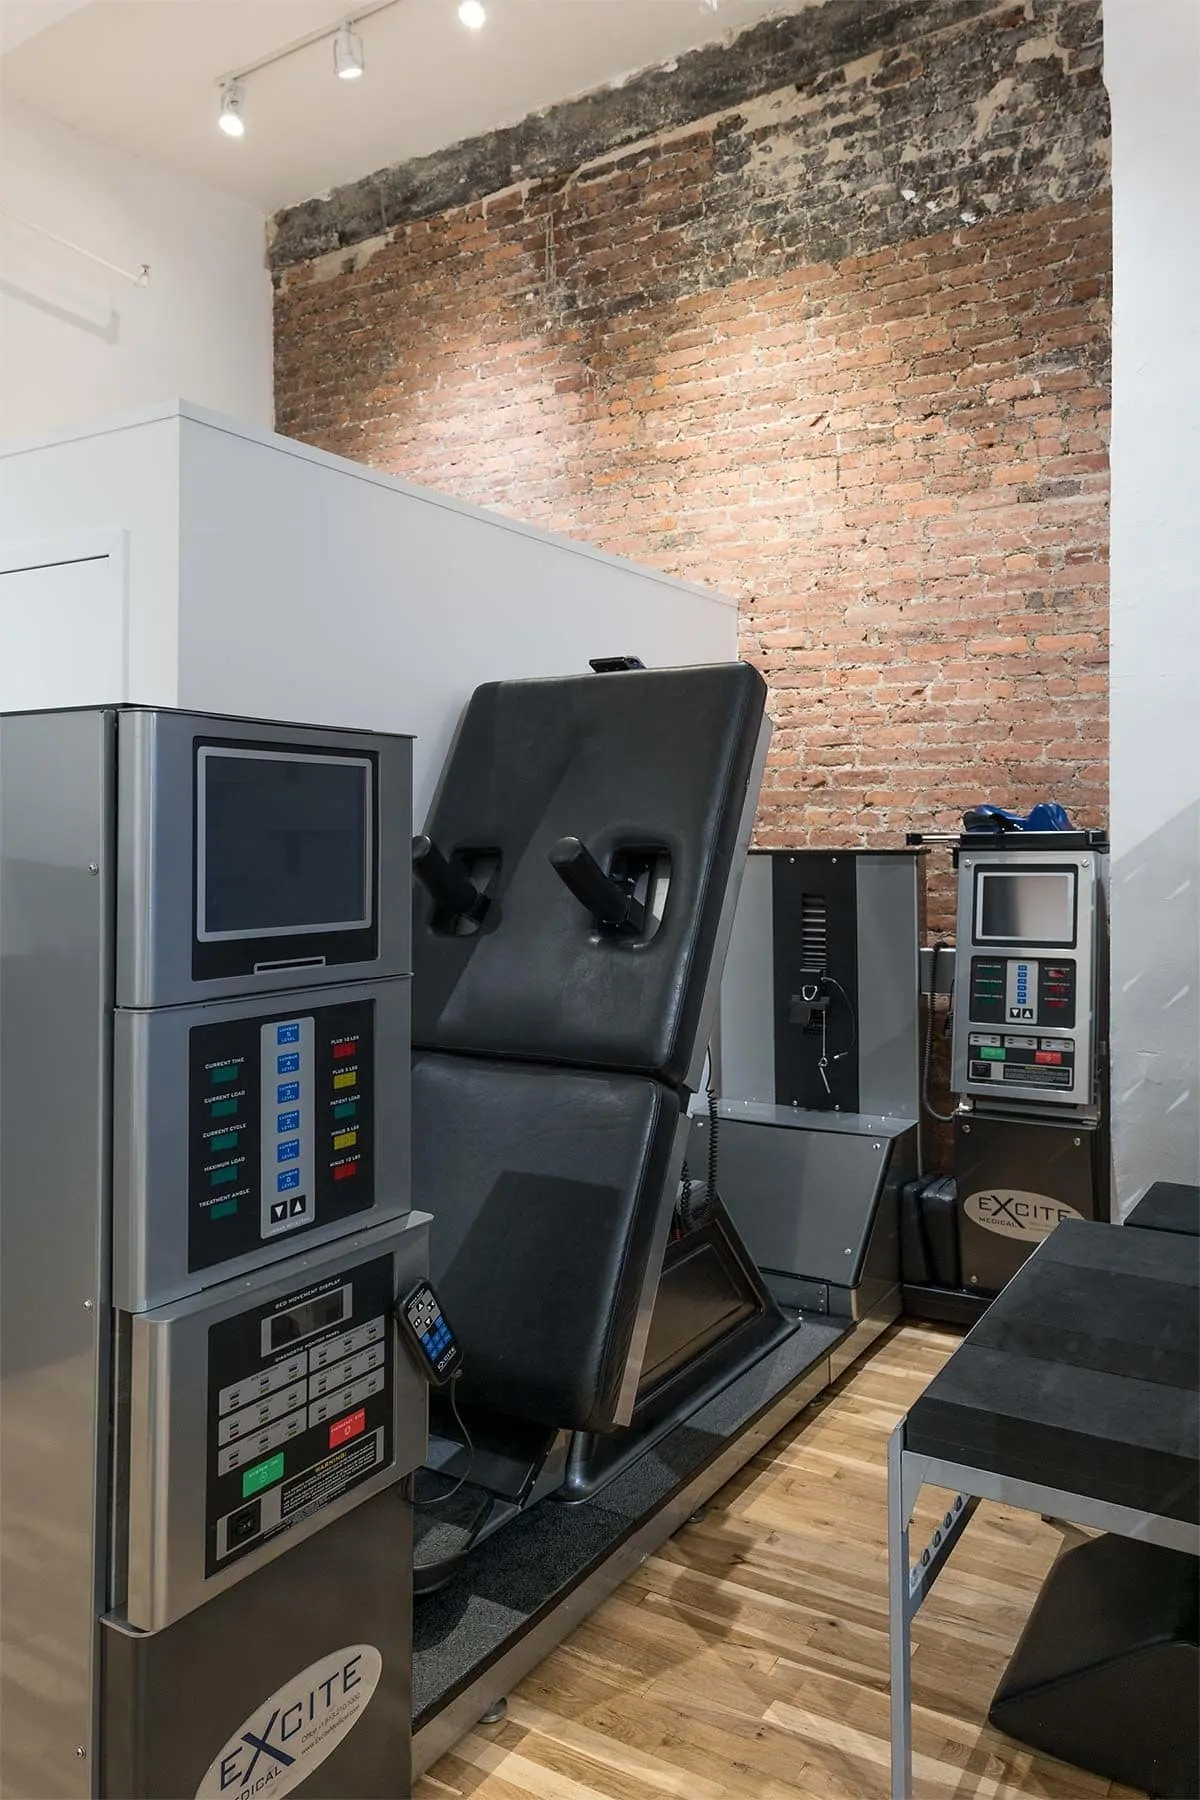 NYC Non-Surgical Spinal Decompression The DRX 9000 provides true non-surgical spinal decompression in Soho Manhattan on Broadway